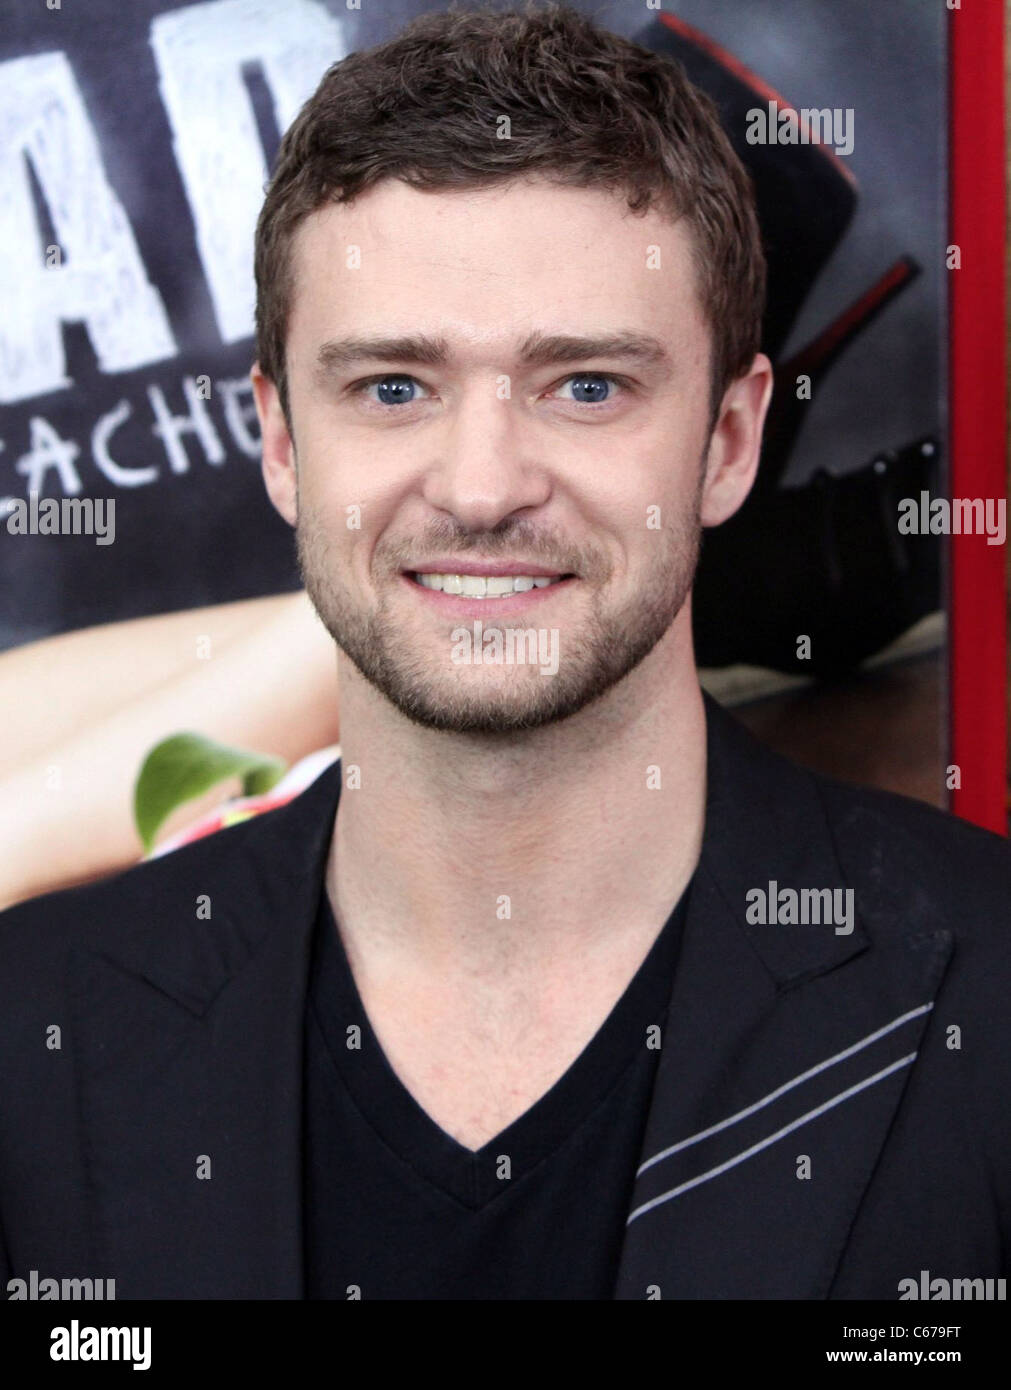 Justin Timberlake at arrivals for BAD TEACHER Premiere, The Ziegfeld Theatre, New York, NY June 20, 2011. Photo By: Andres Otero/Everett Collection Stock Photo